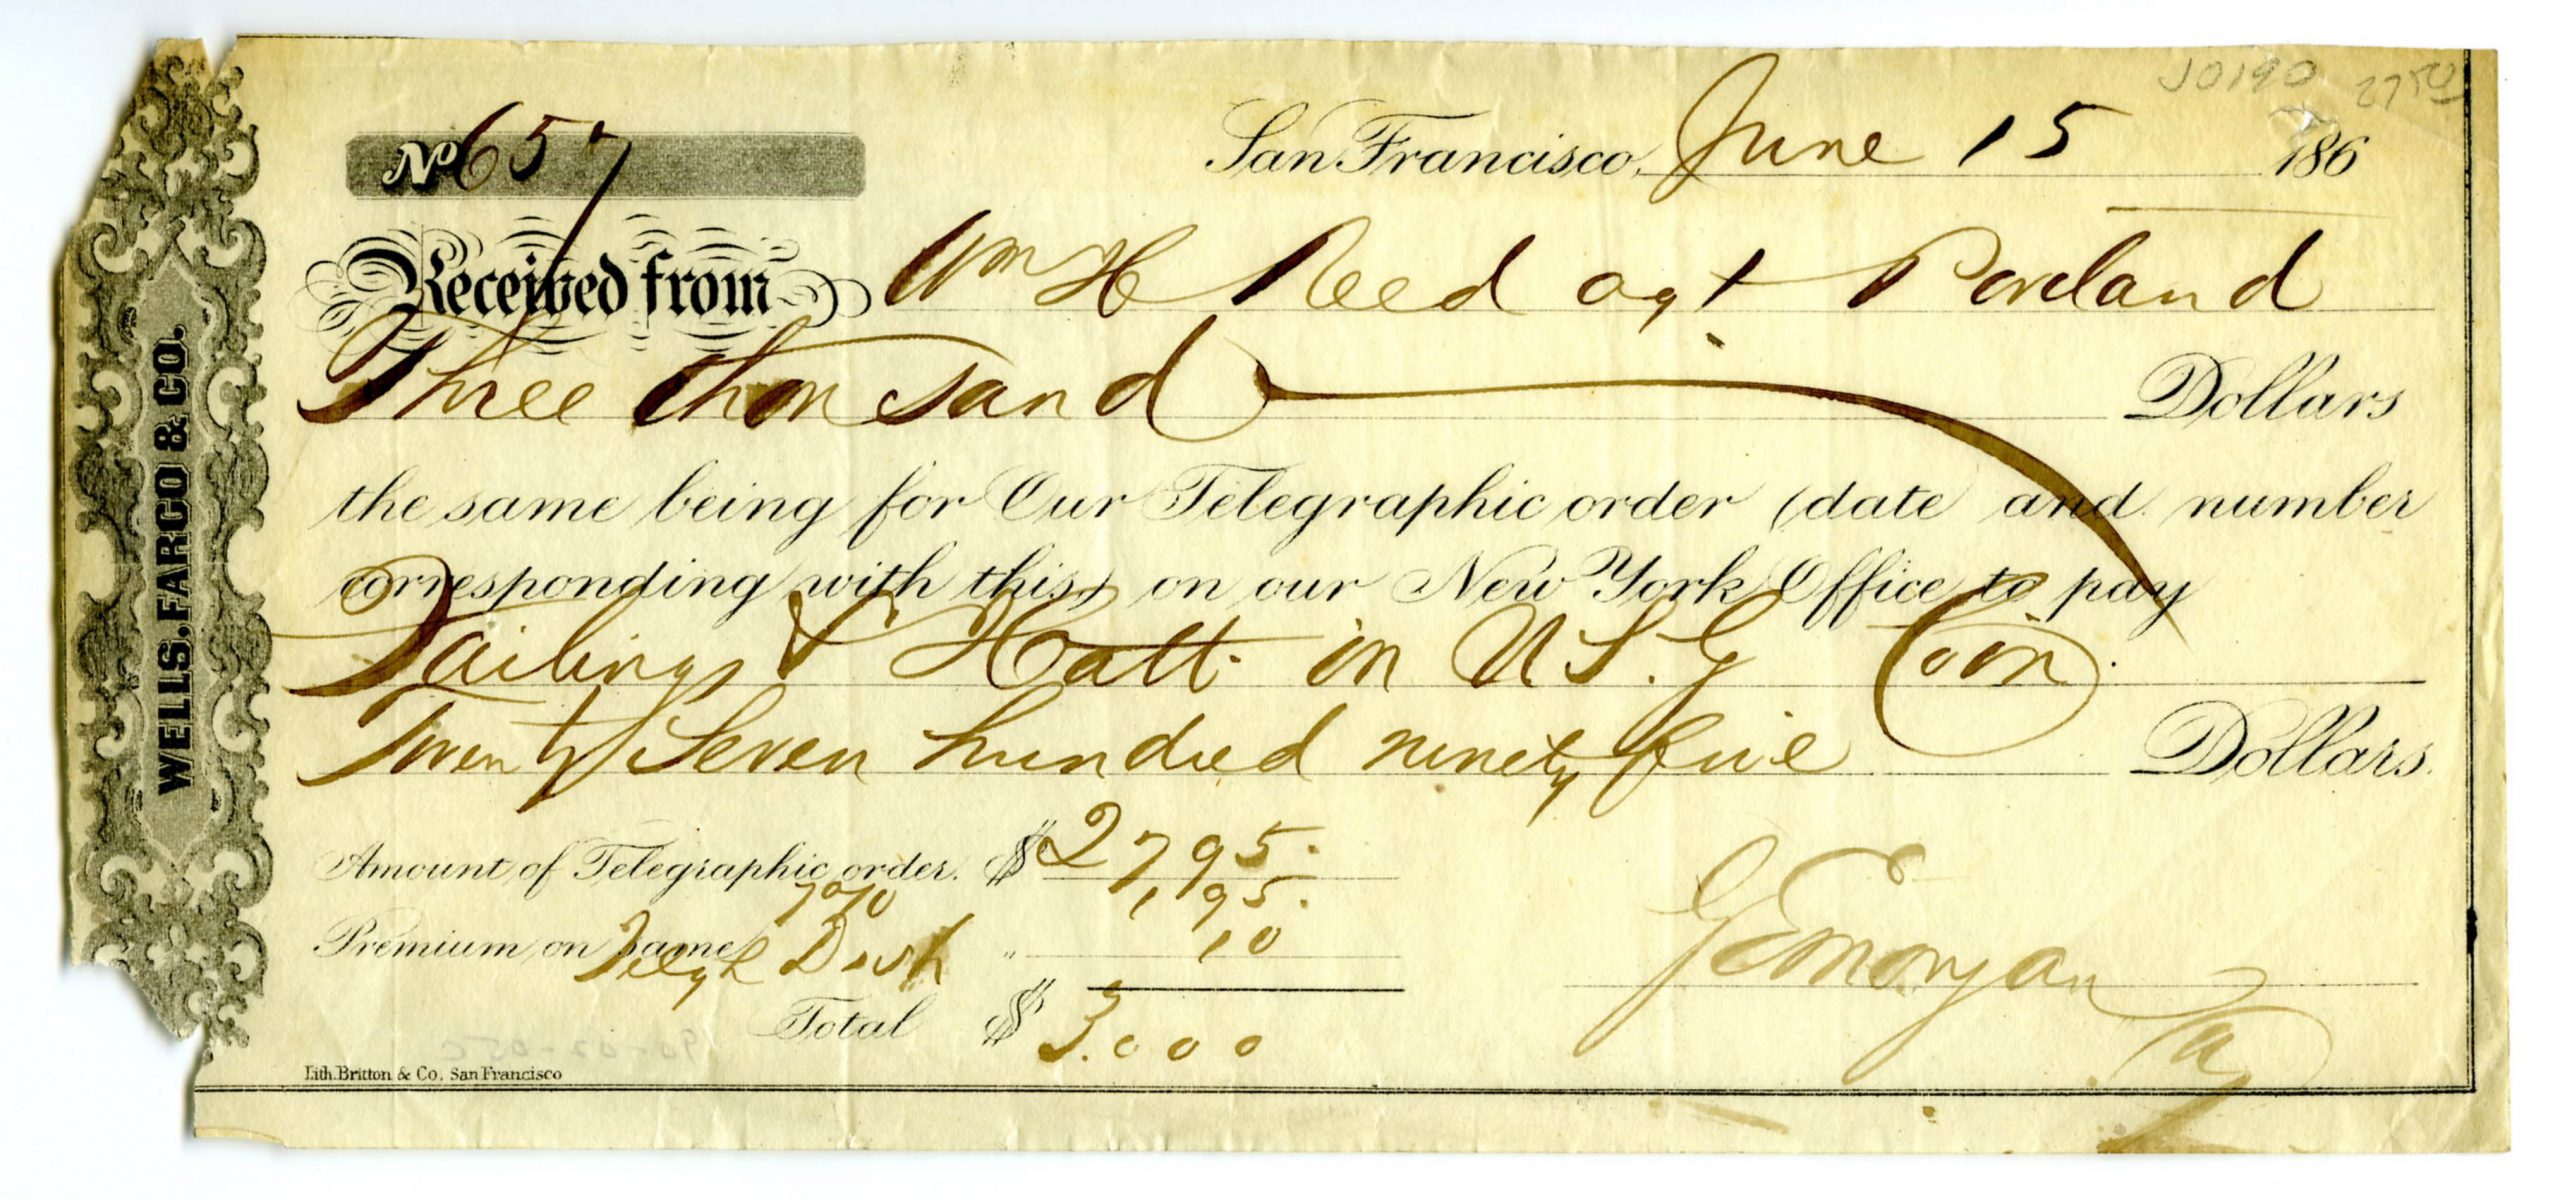 Form: San Francisco June 15, 1860s. Received from William Reed, agt Portland. Three thousand dollars the same being for our telegraphic order date & number corresponding with this on our New York office to pay Failing and Hatt in U.S. Coin $2,795.